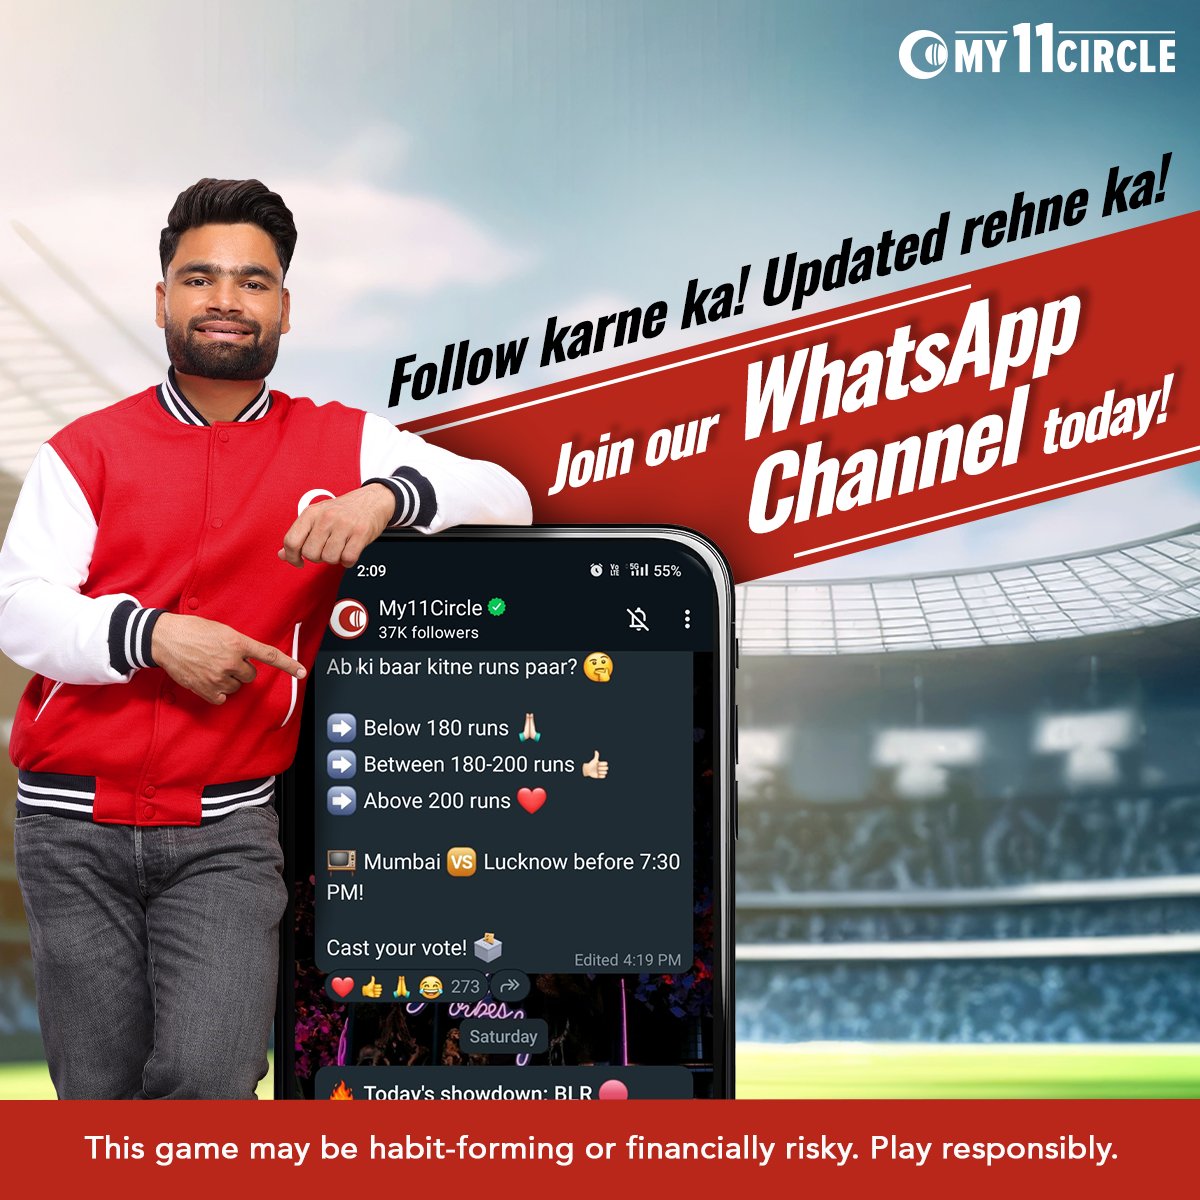 Jaano fantasy games ke baare mein in and out and raho updated no matter where you go! Click on the link in the bio to join our Whatsapp channel! whatsapp.com/channel/0029Va… #My11Circle #Cricket #FantasyCricket